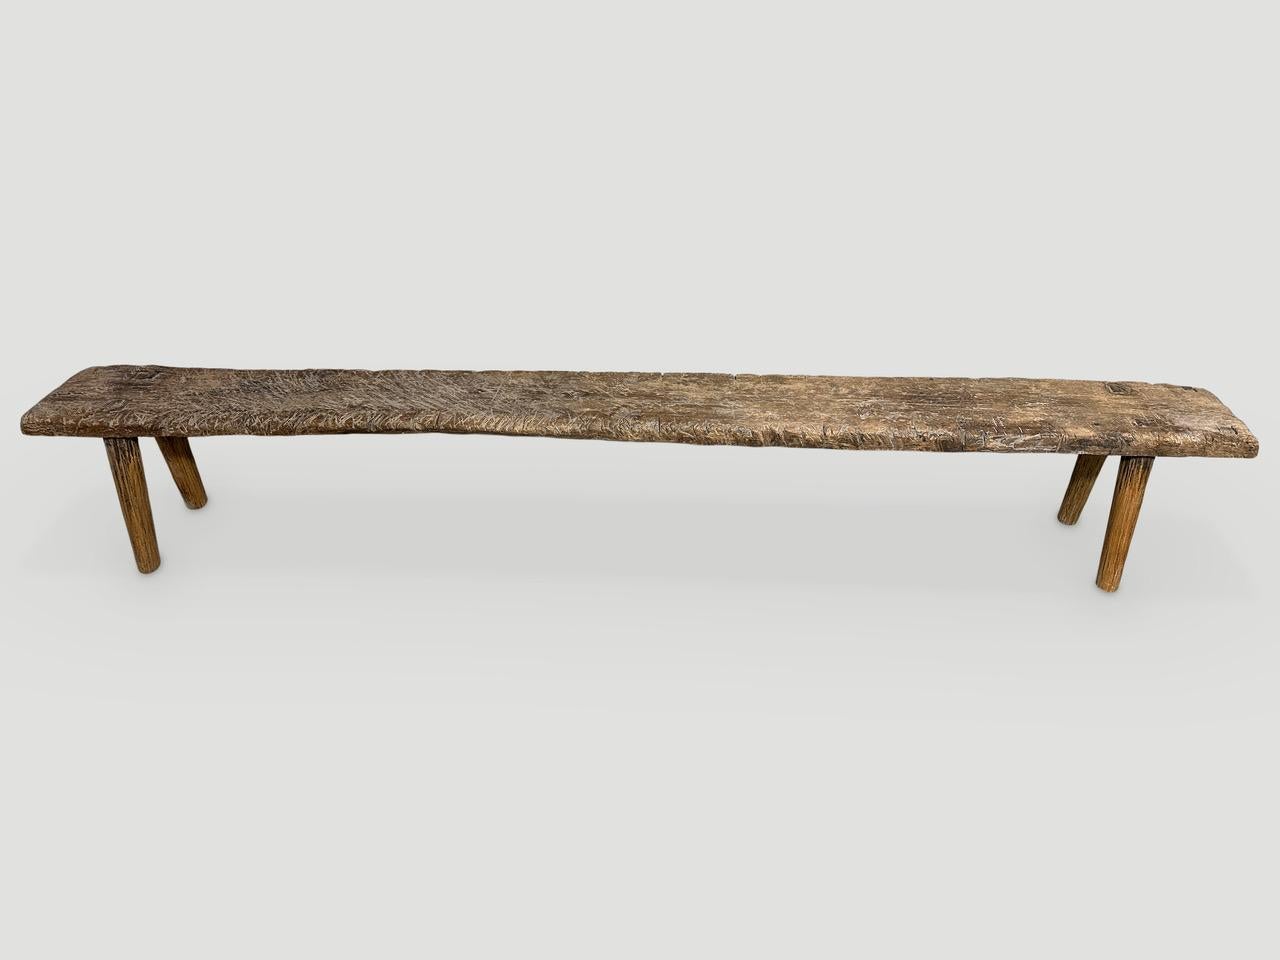 Andrianna Shamaris Antique Teak Wood Long Bench In Excellent Condition For Sale In New York, NY